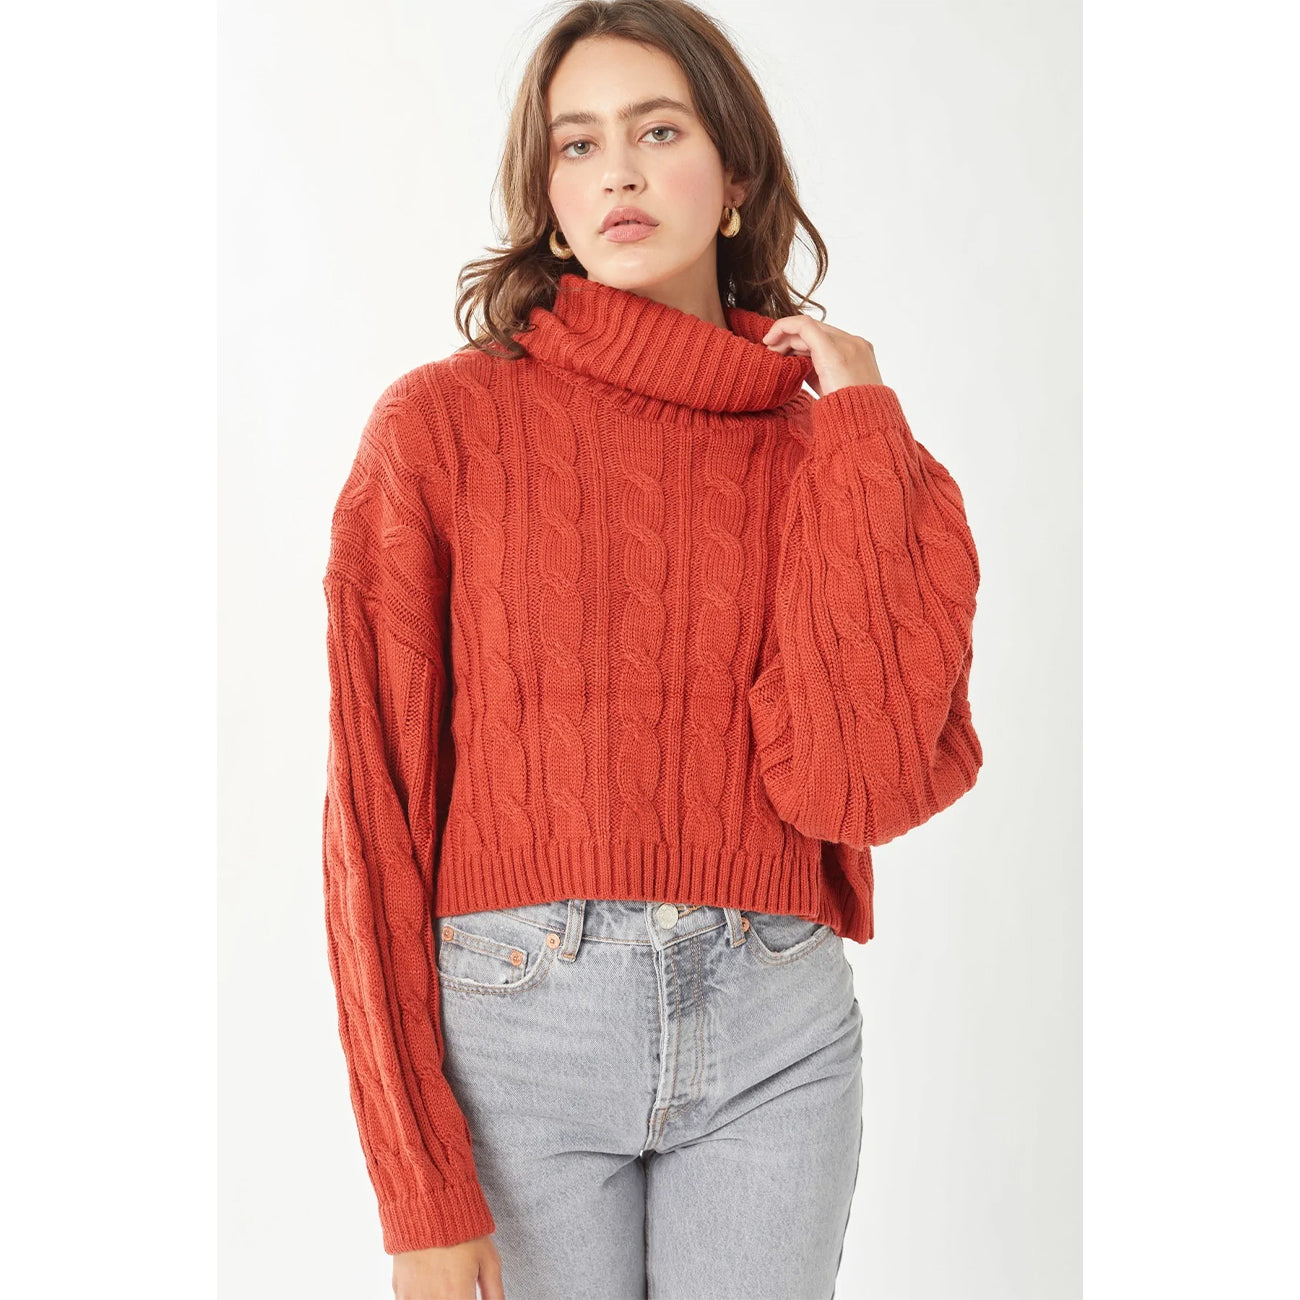 Turtleneck Loose Fit Cable Knit Women's Sweater